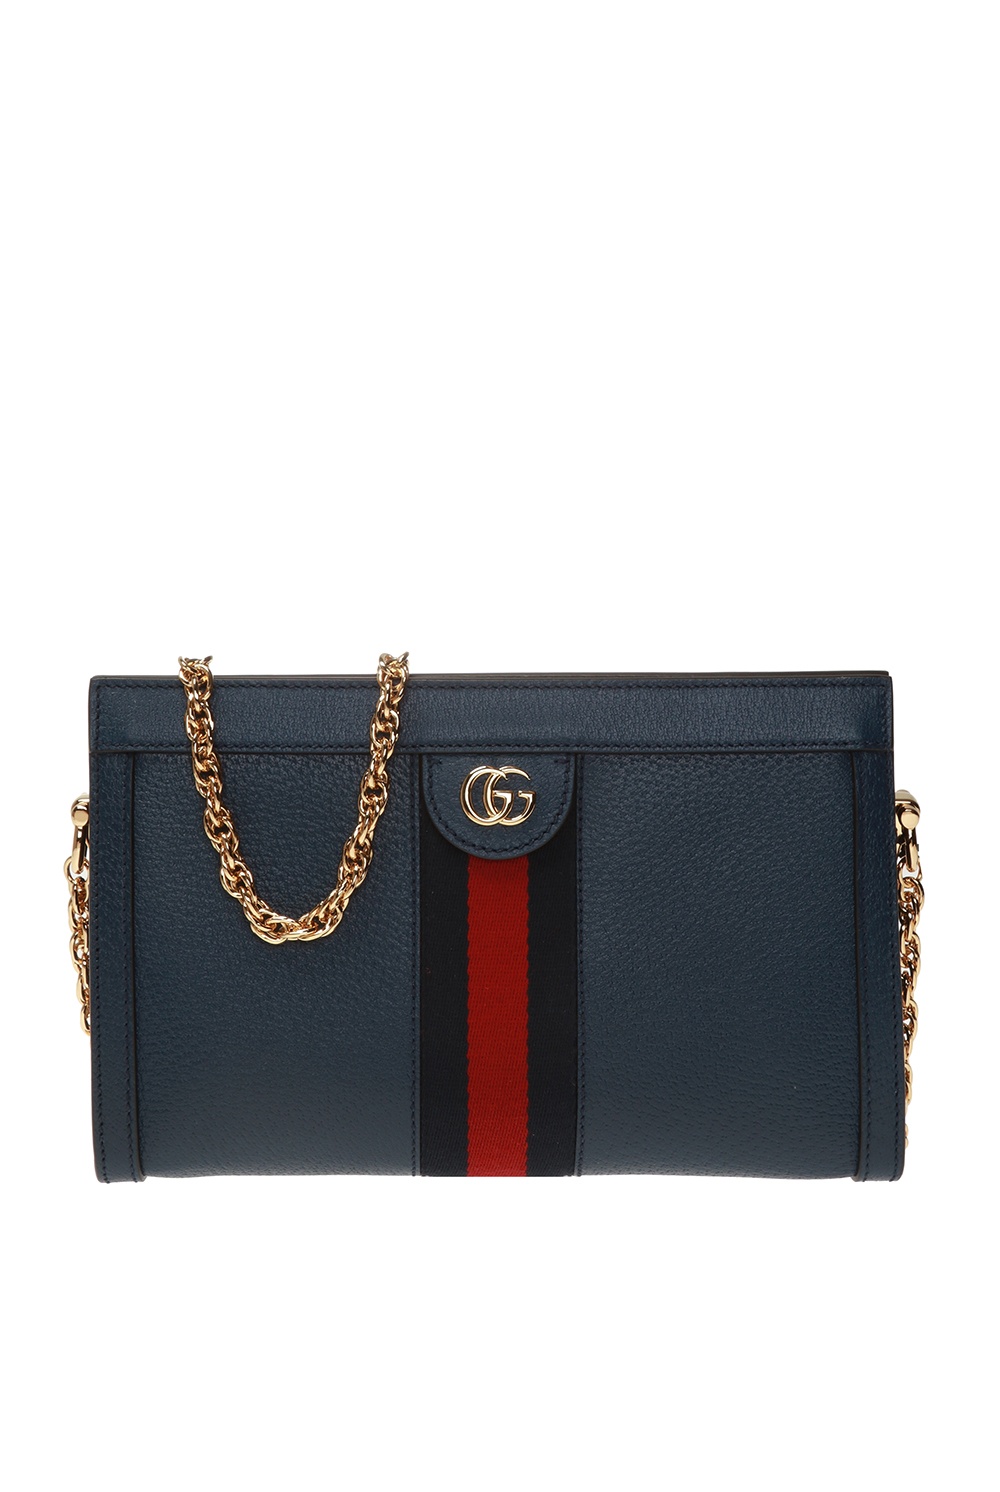 Featured image of post Gucci Computer Bag The house brings its iconic monogram print and logo to the collection of gucci phone cases and computer gadgets